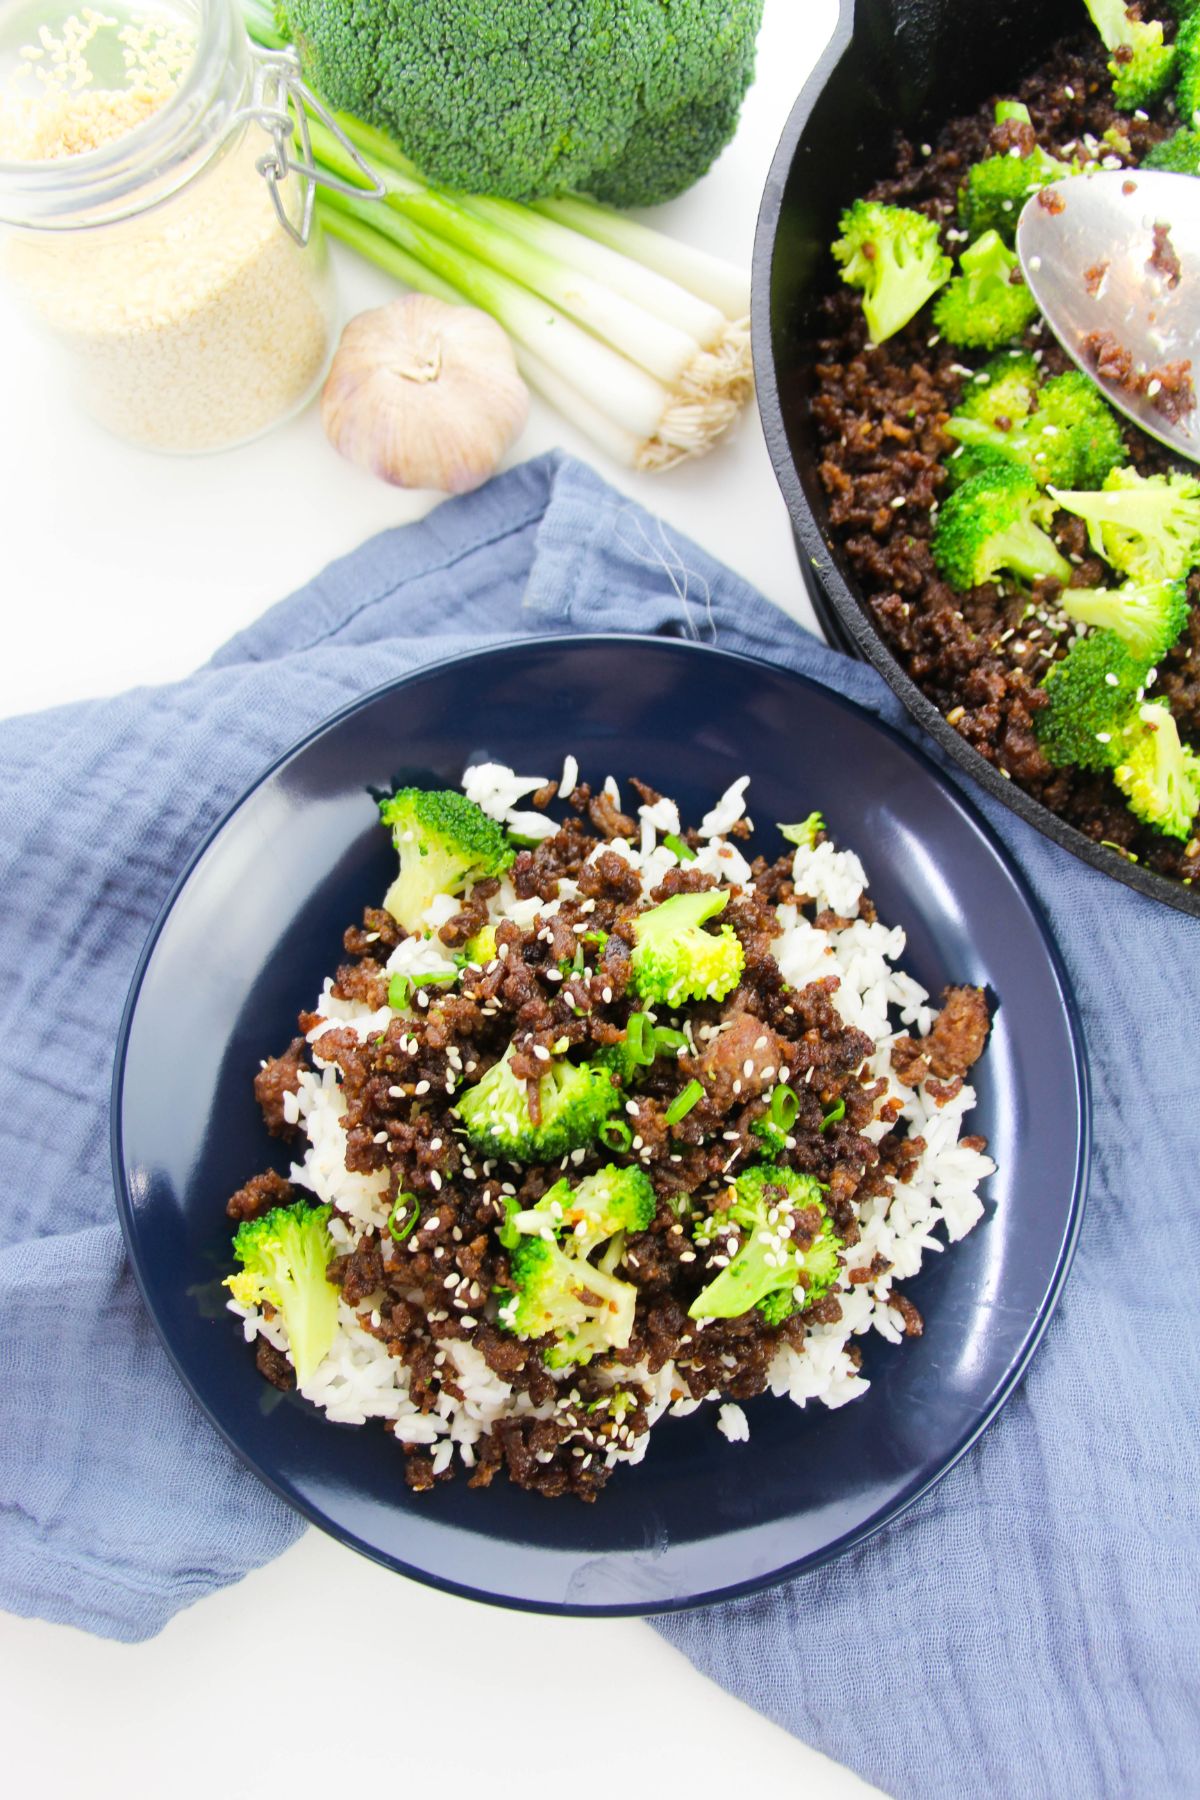 Korean Ground Beef and Broccoli on a serving plate, garnished with sesame seeds.